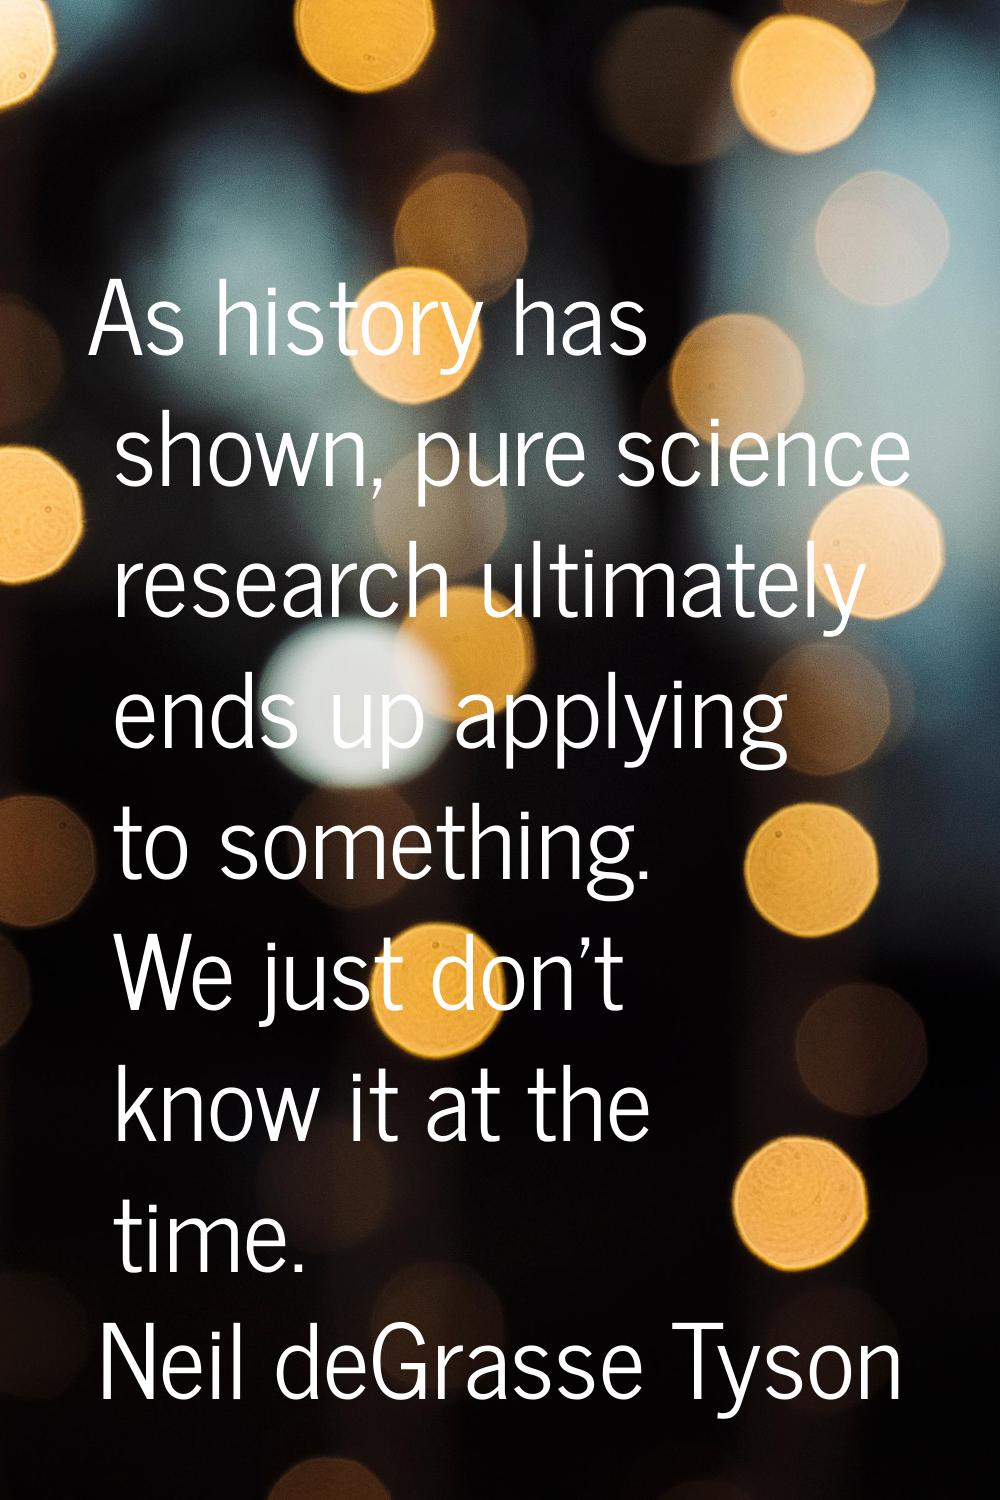 As history has shown, pure science research ultimately ends up applying to something. We just don't